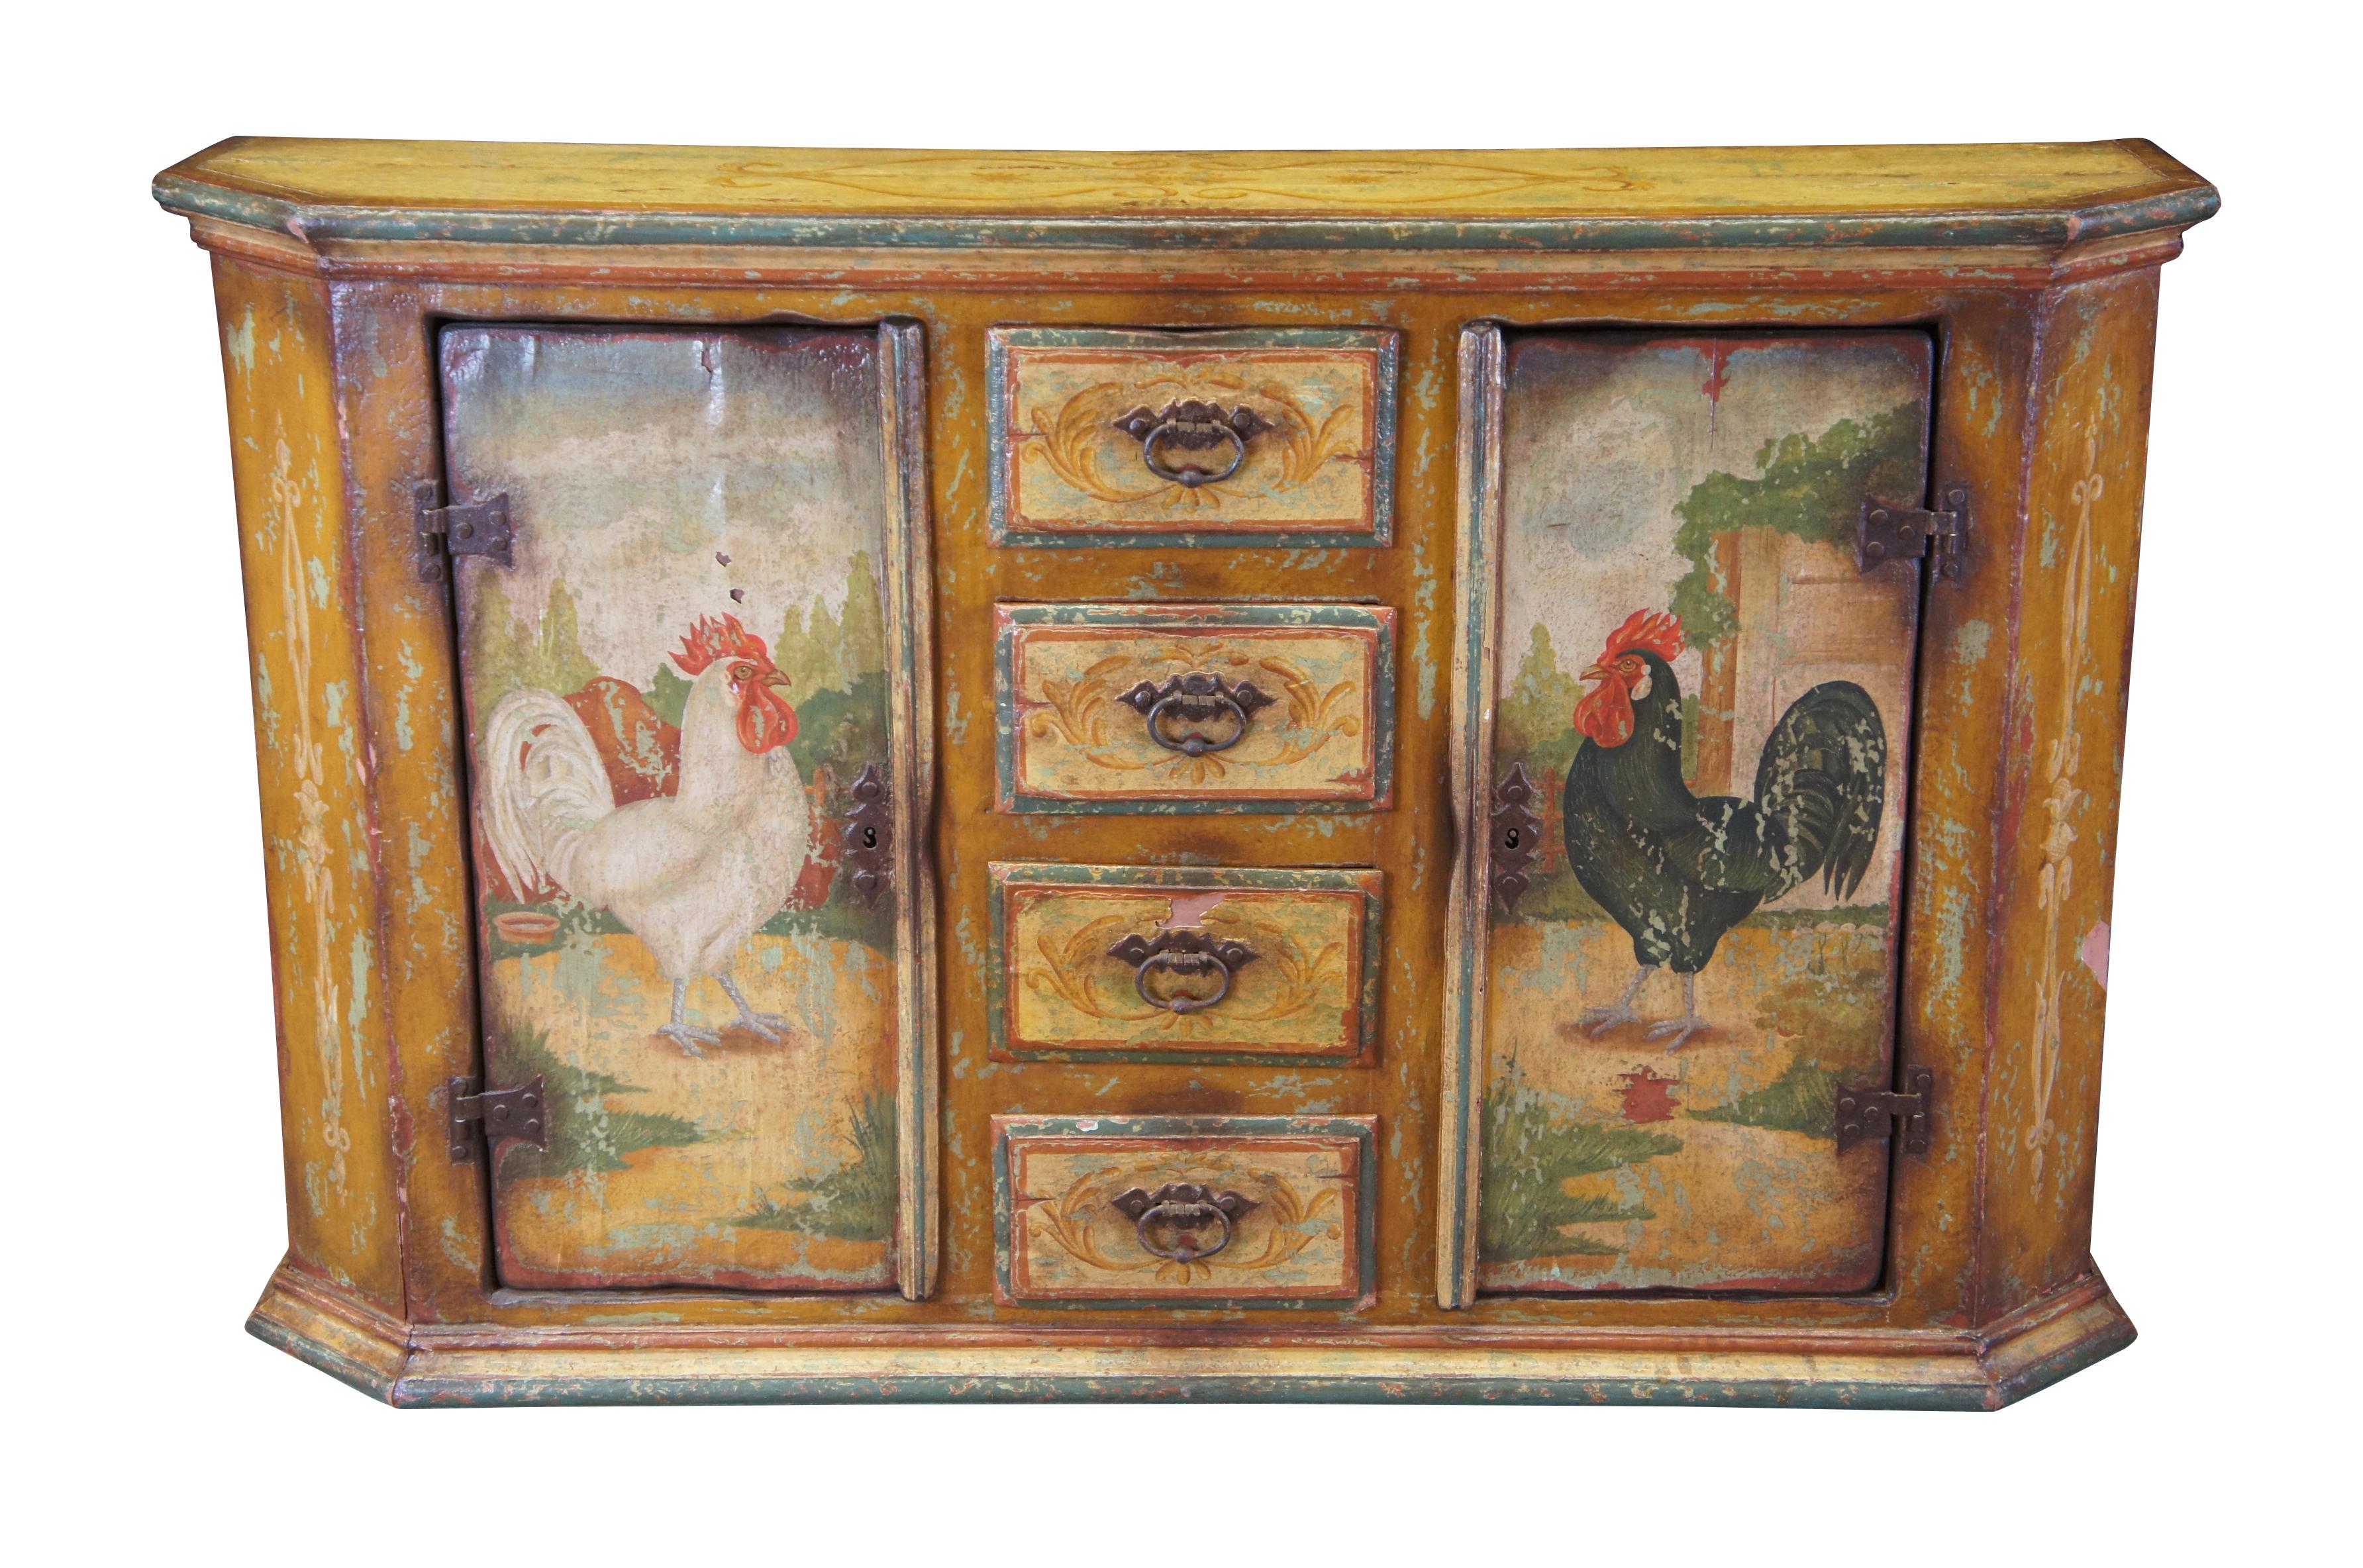 A stylish modern tuscan farmhouse credenza, circa last quarter 20th century.  Inspired by Old World French Country styling.  The slender case is made from heavy hardwood featuring 4 central drawers flanked by outer cabinets.  Outer doors open to a